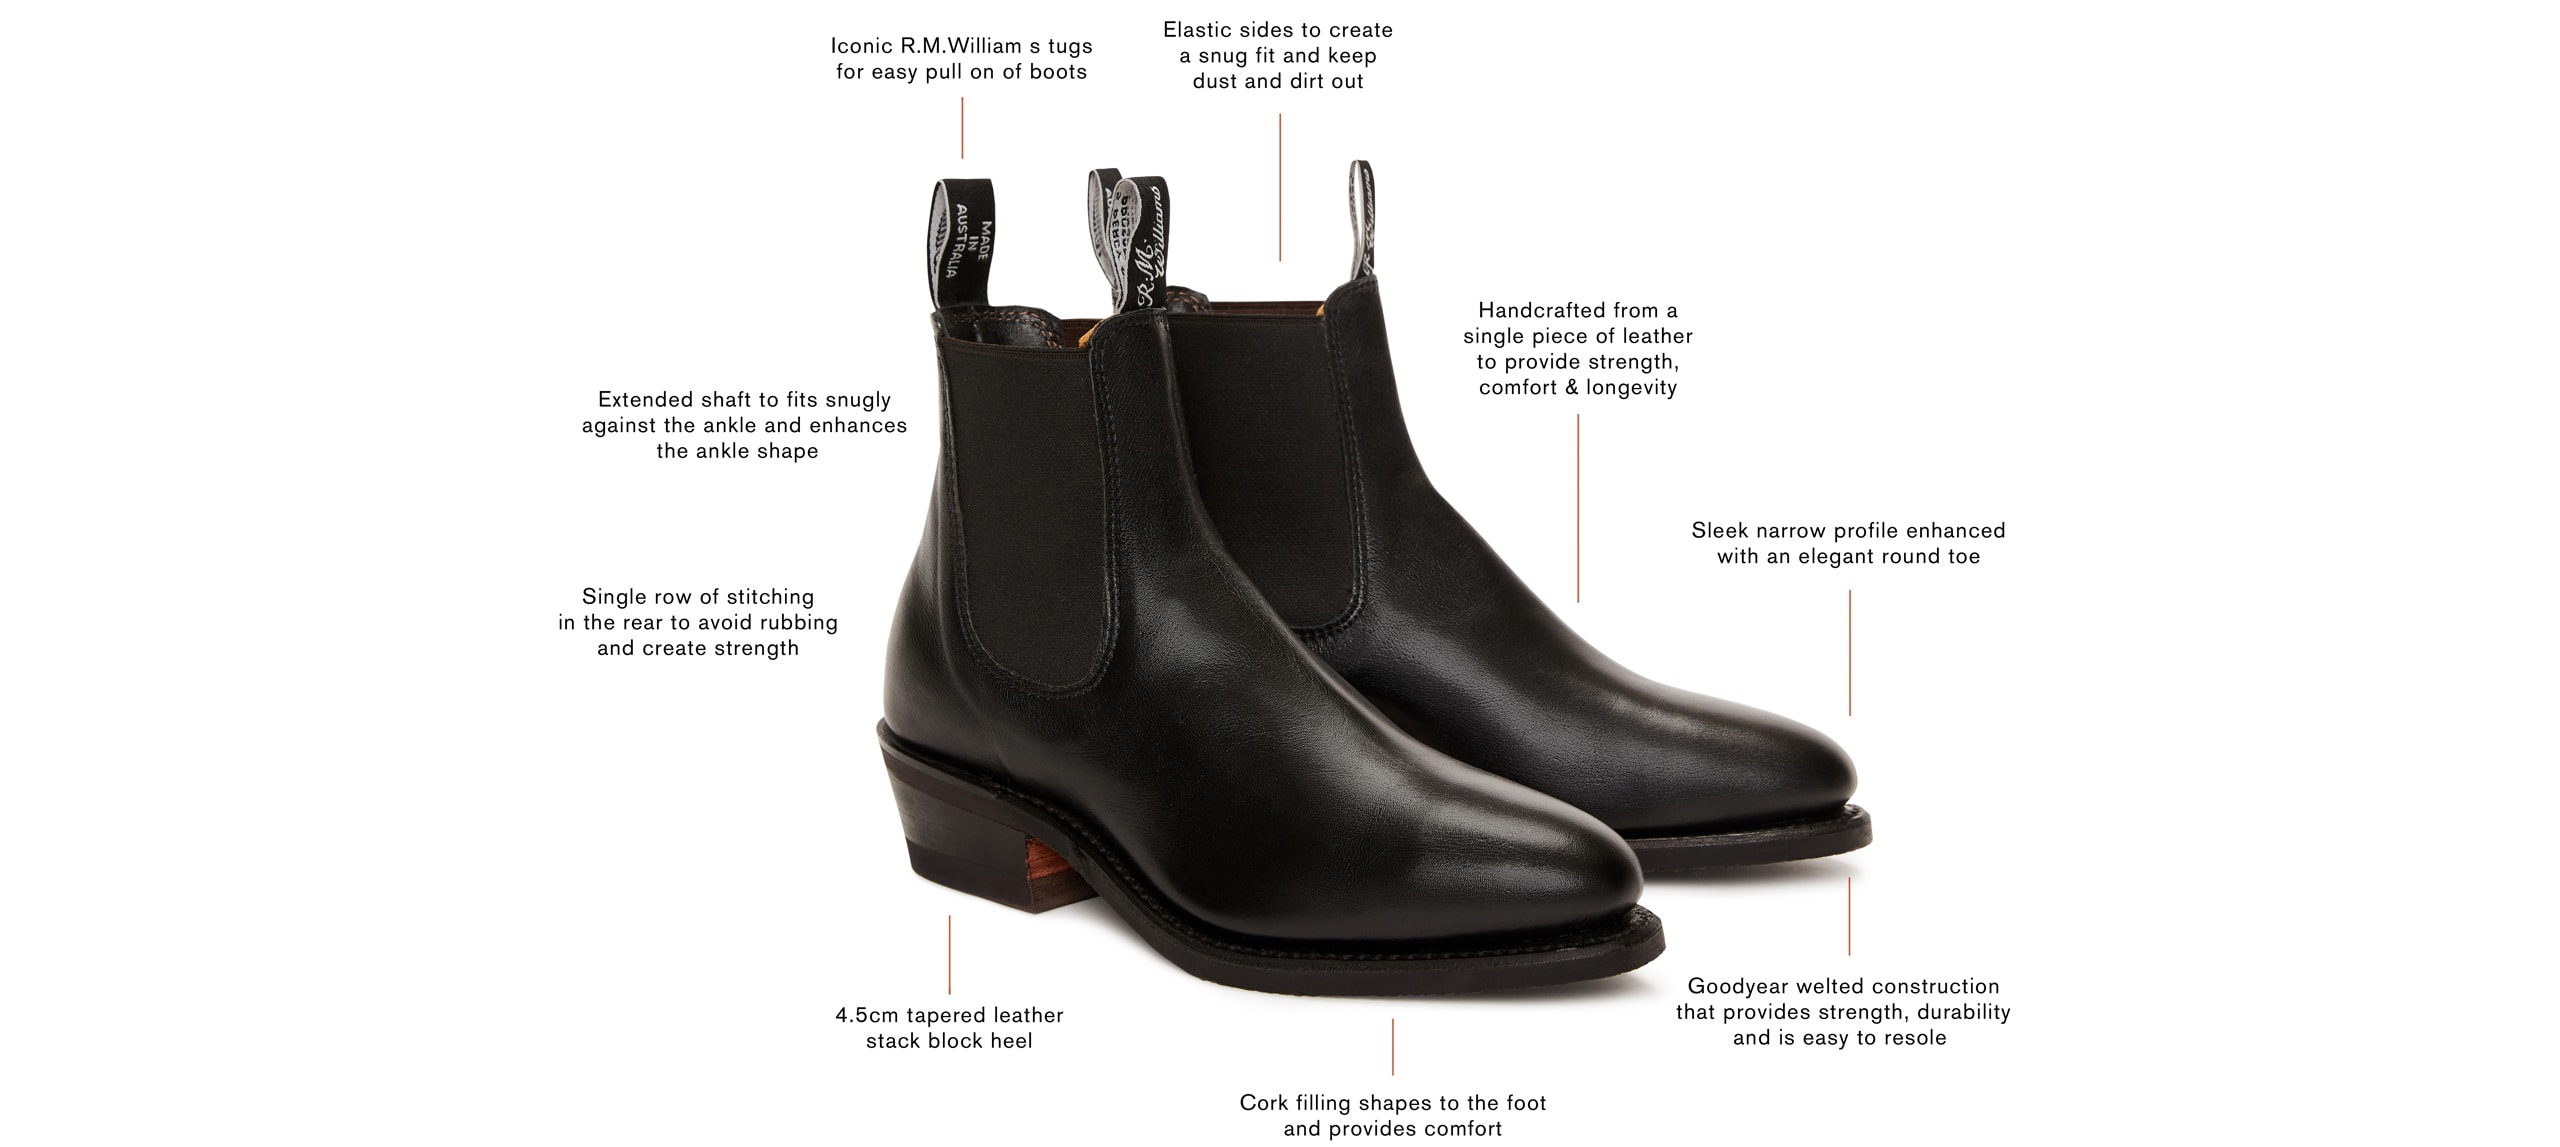 How do you wear your classic Lady Yearling boot? | R.M.Williams®